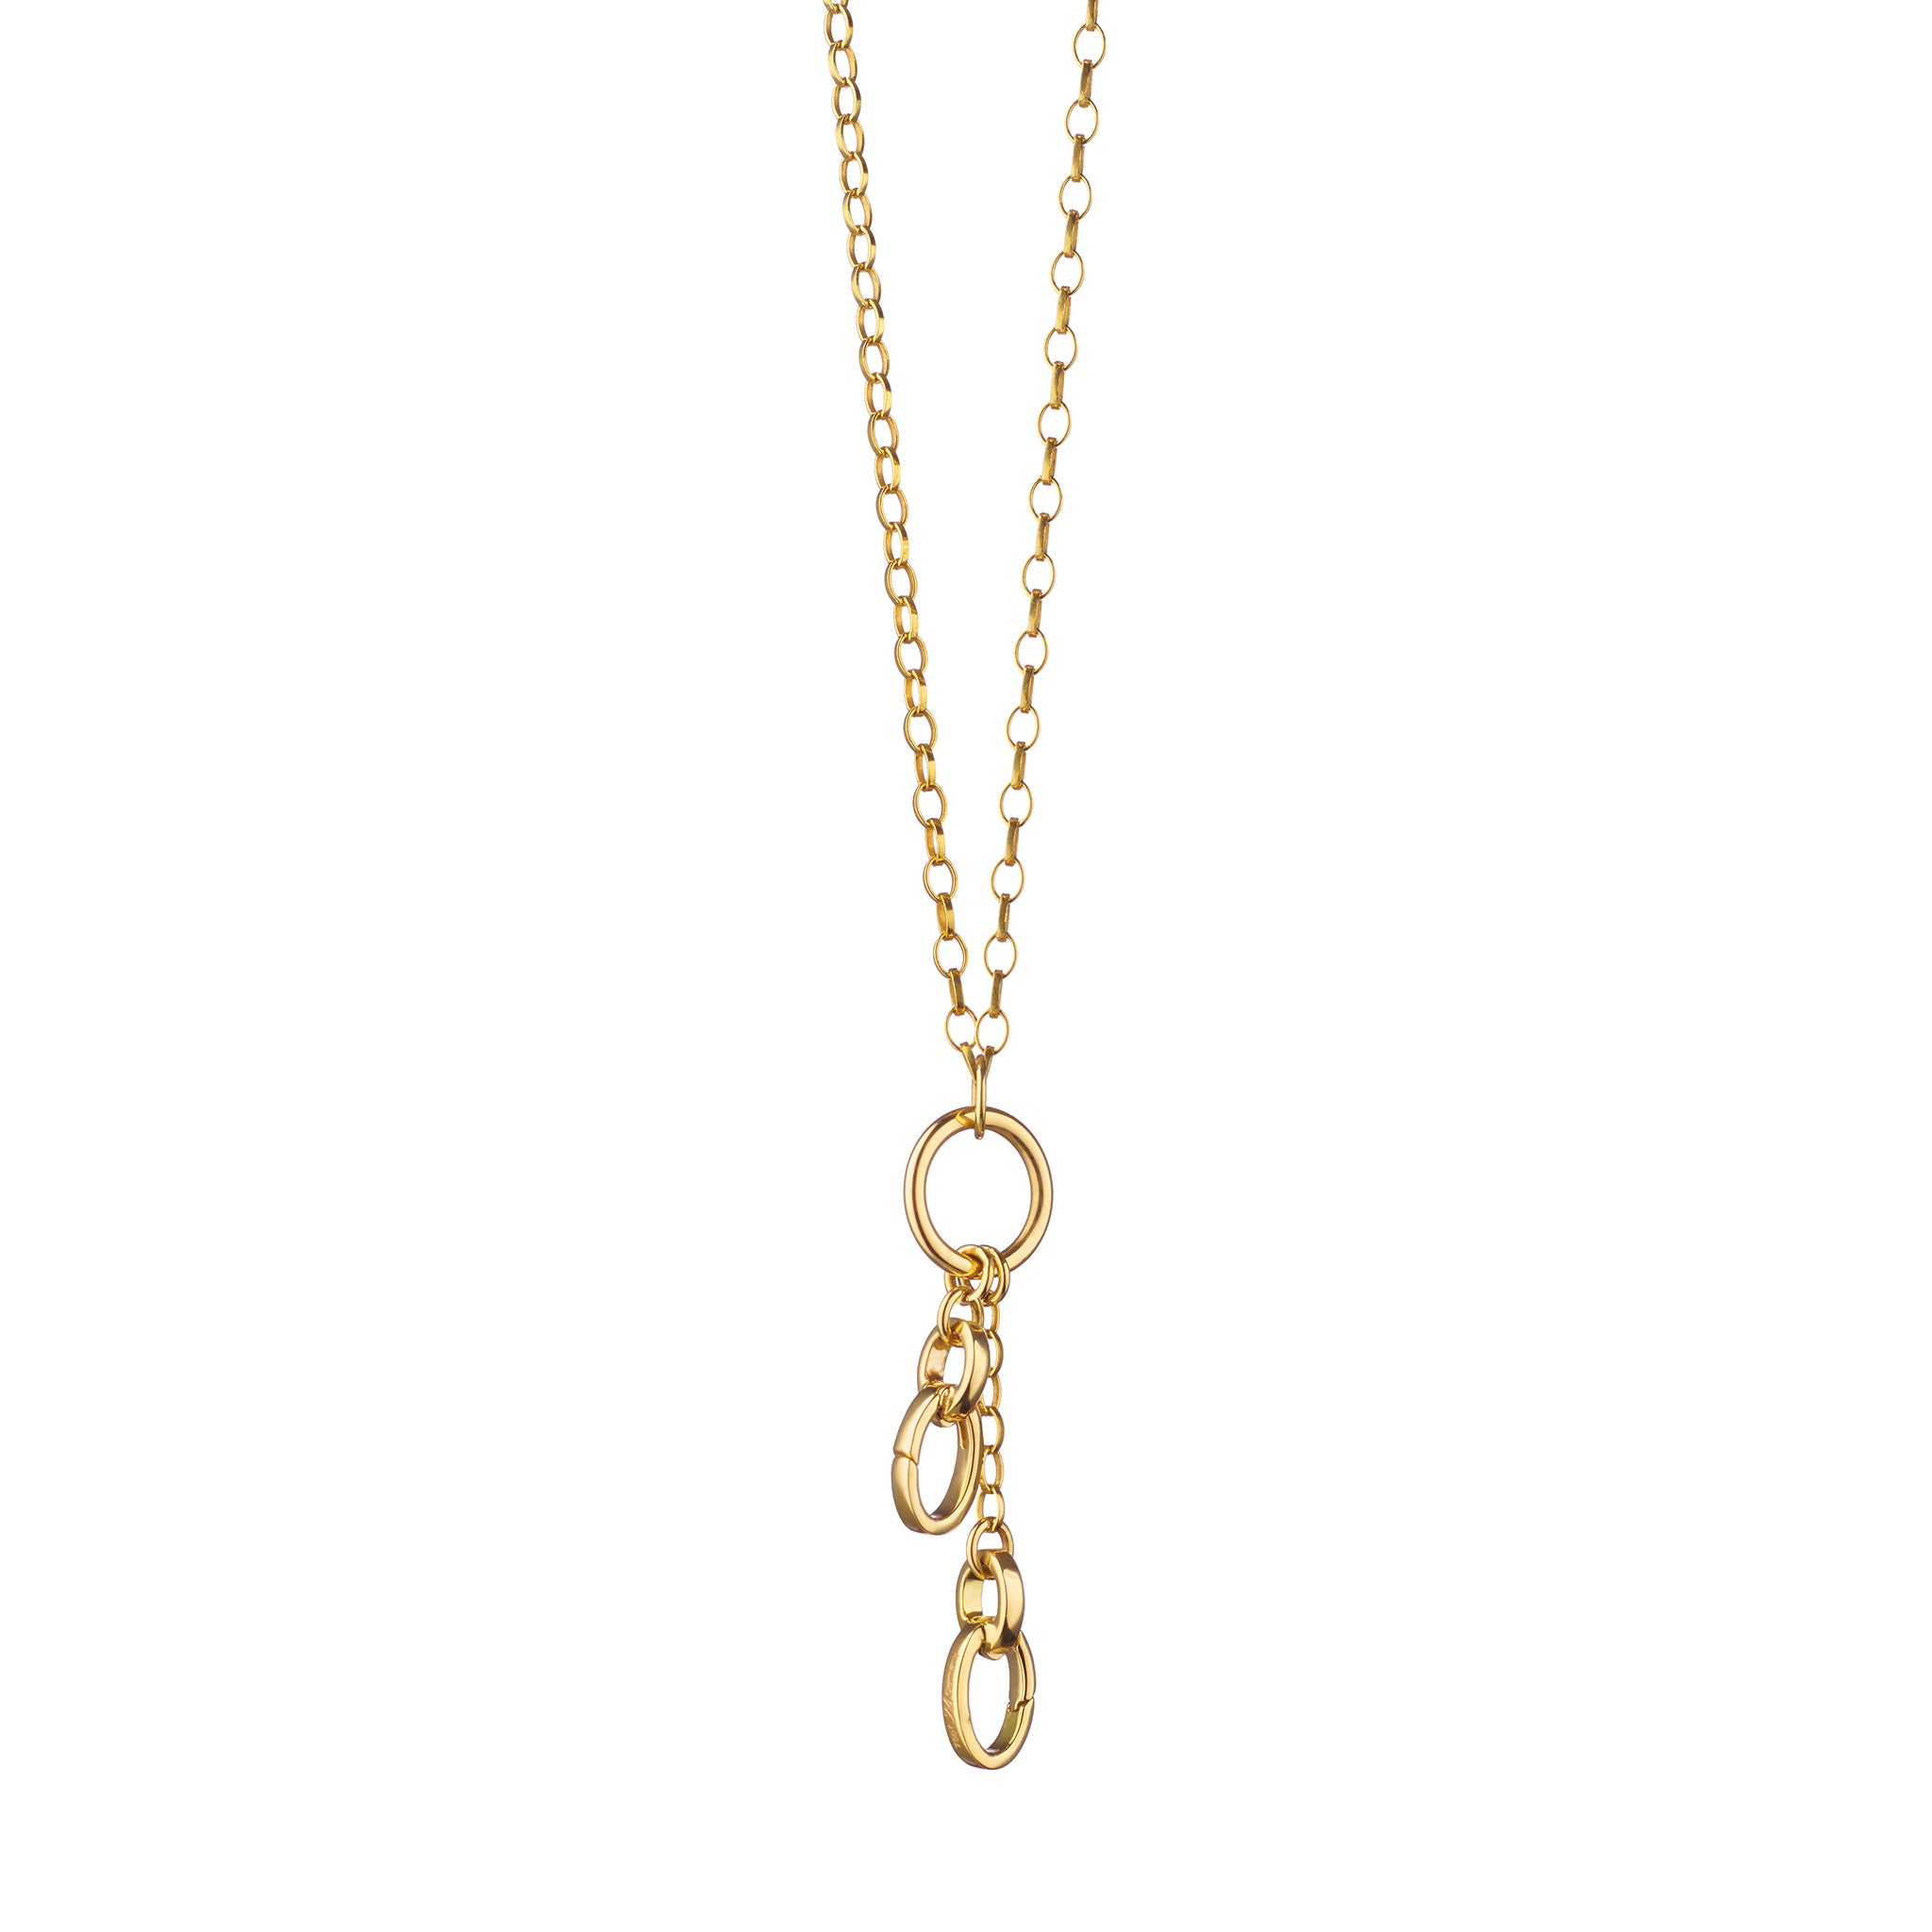 18ct Gold My Life in Seven Charm Necklace